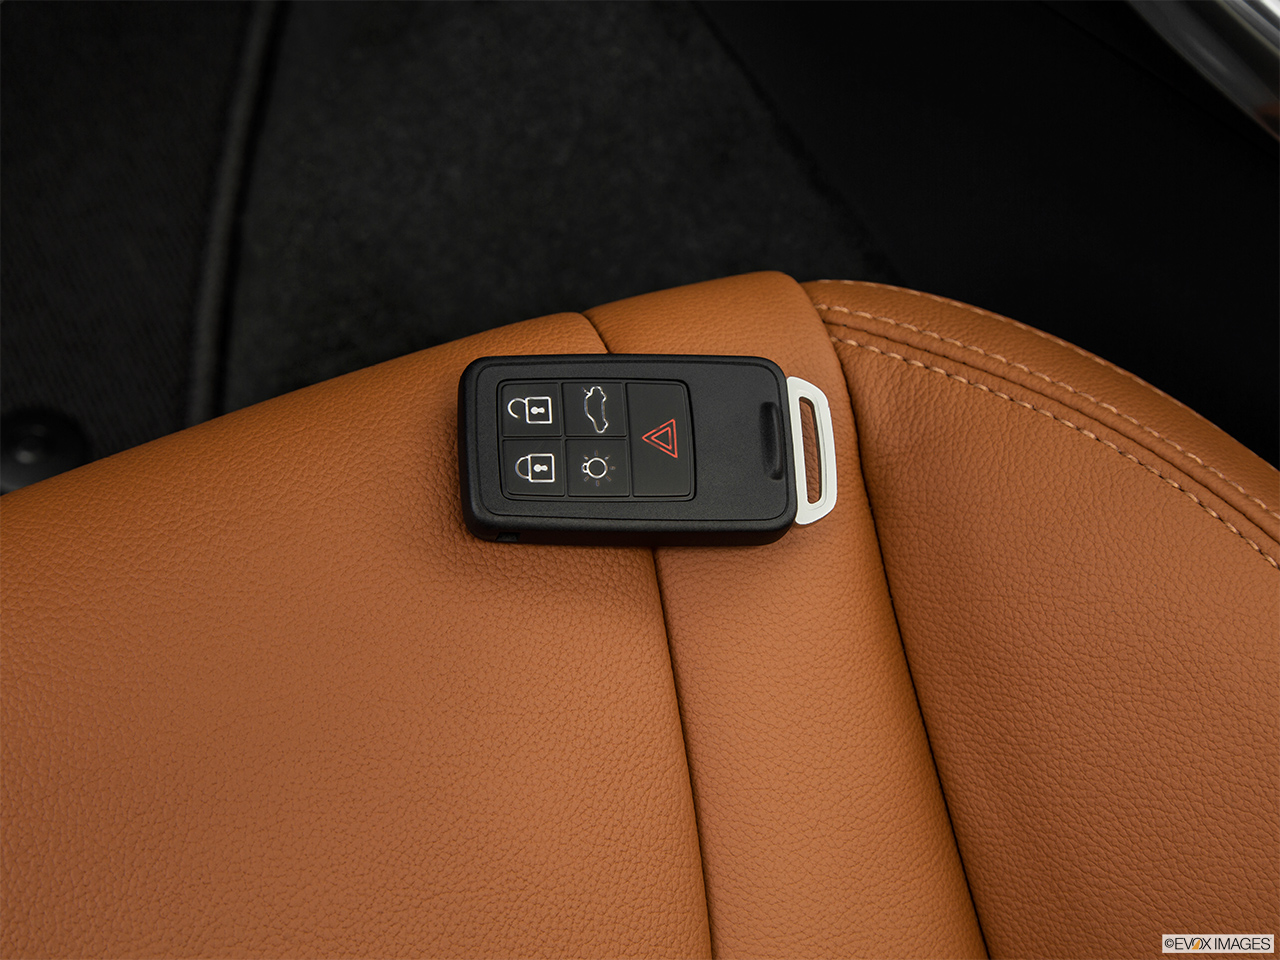 2015 Volvo V60 Cross Country T5 AWD Key fob on driver's seat. 